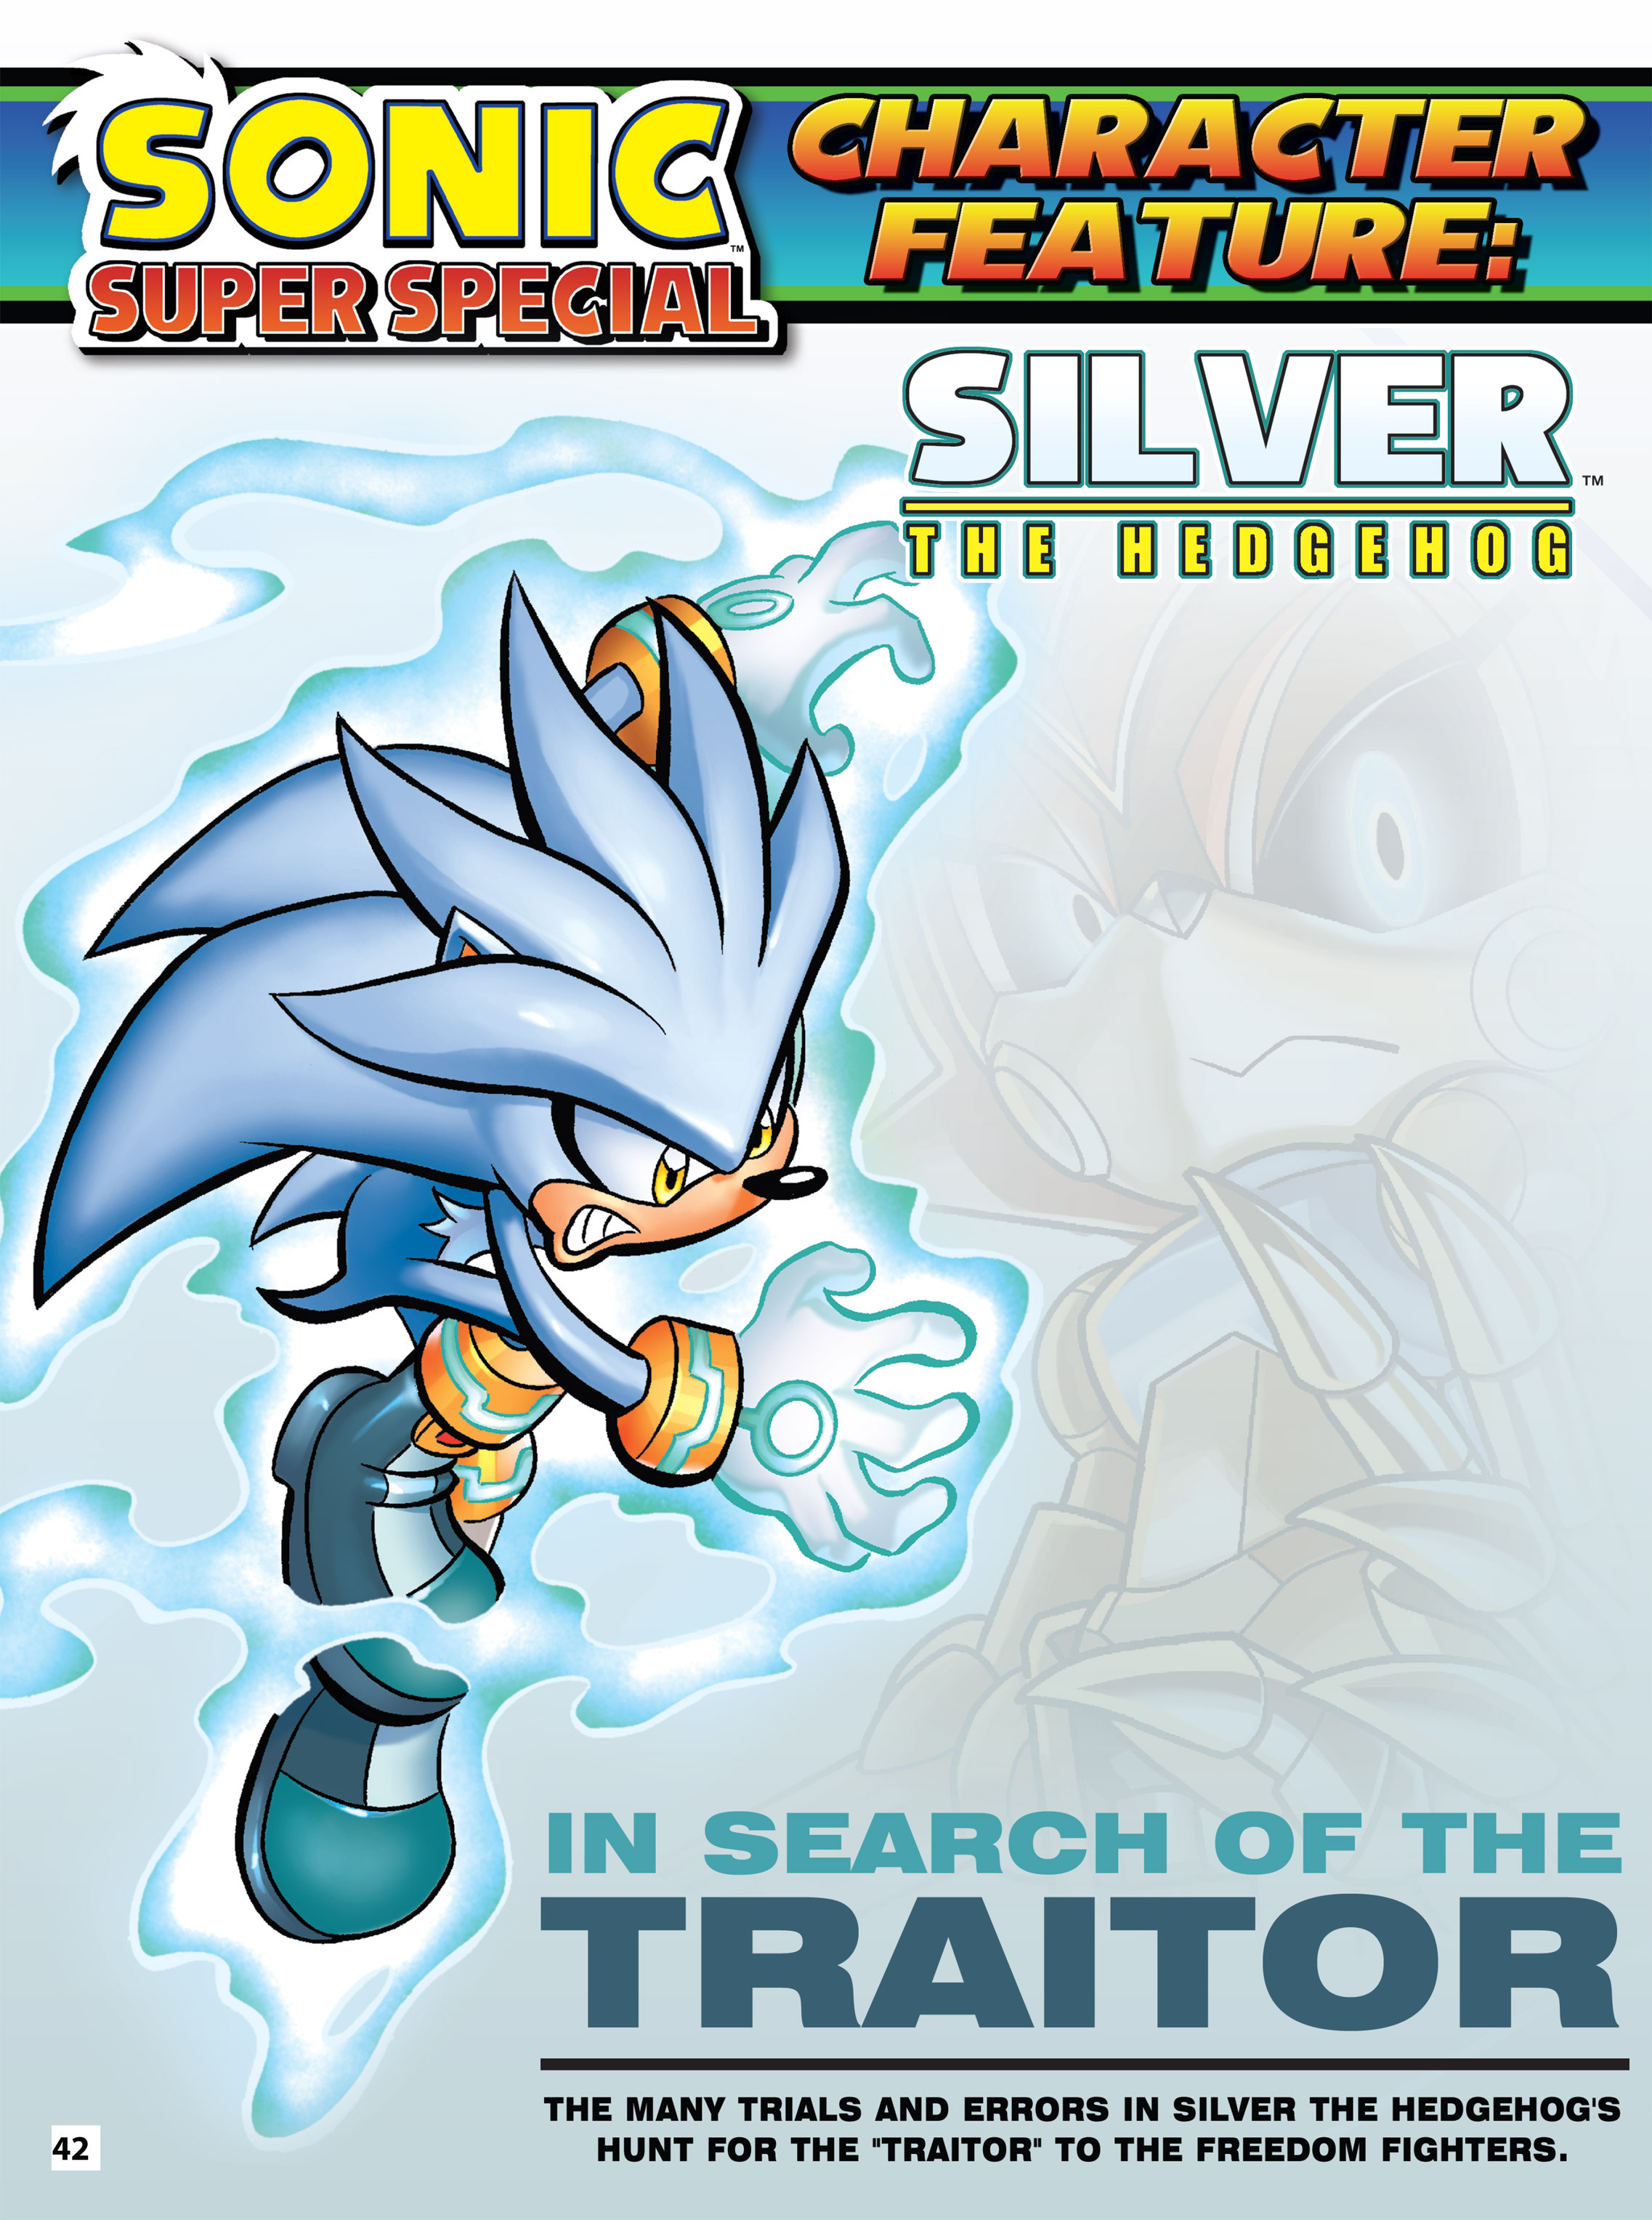 Product Details: Sonic Super Special Magazine #8 sticker spectacular